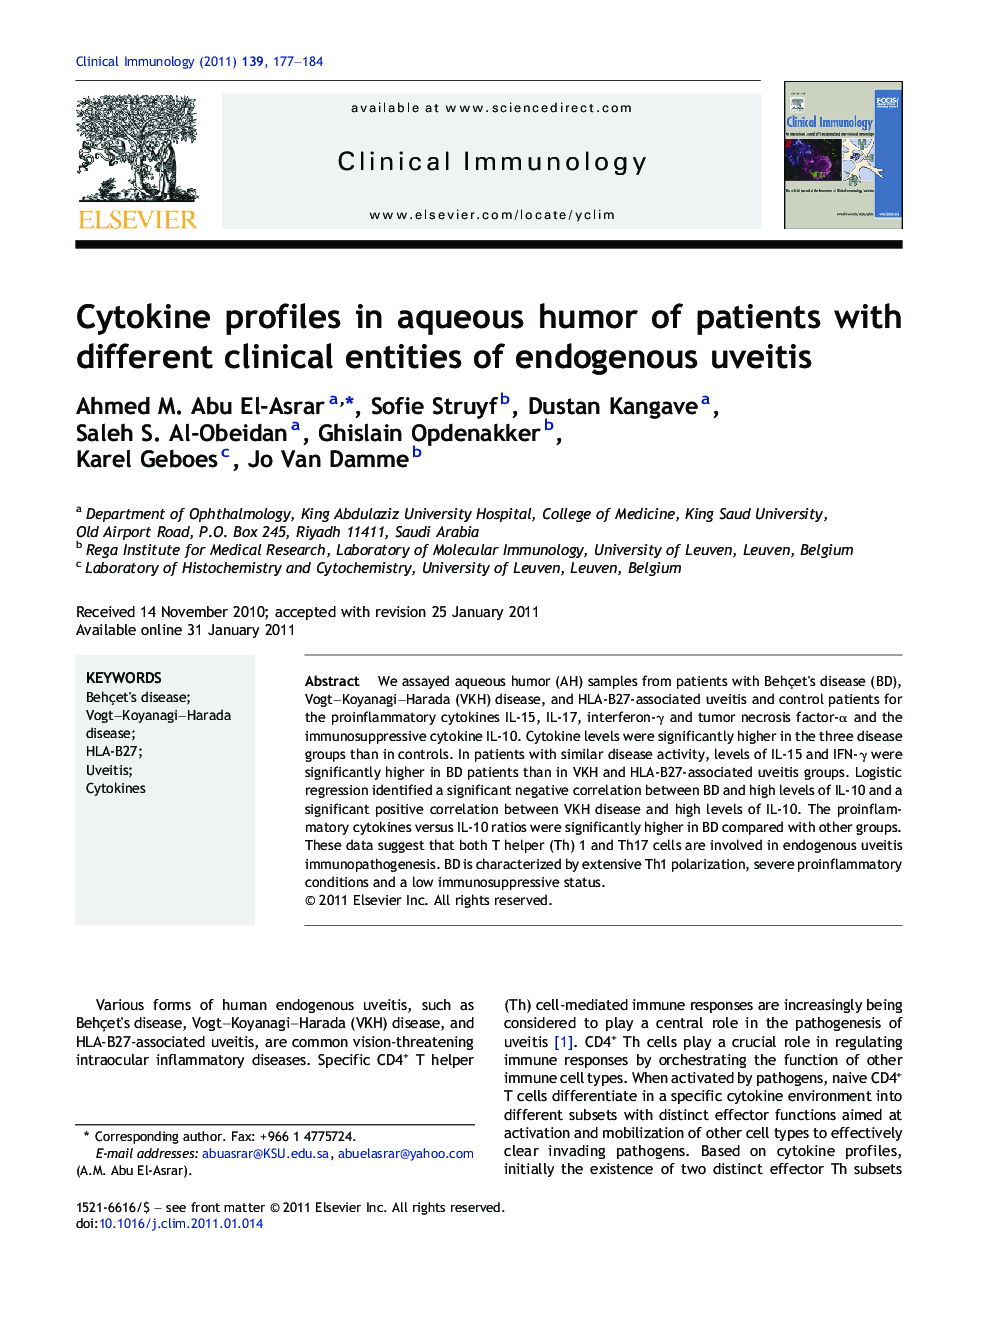 Cytokine profiles in aqueous humor of patients with different clinical entities of endogenous uveitis